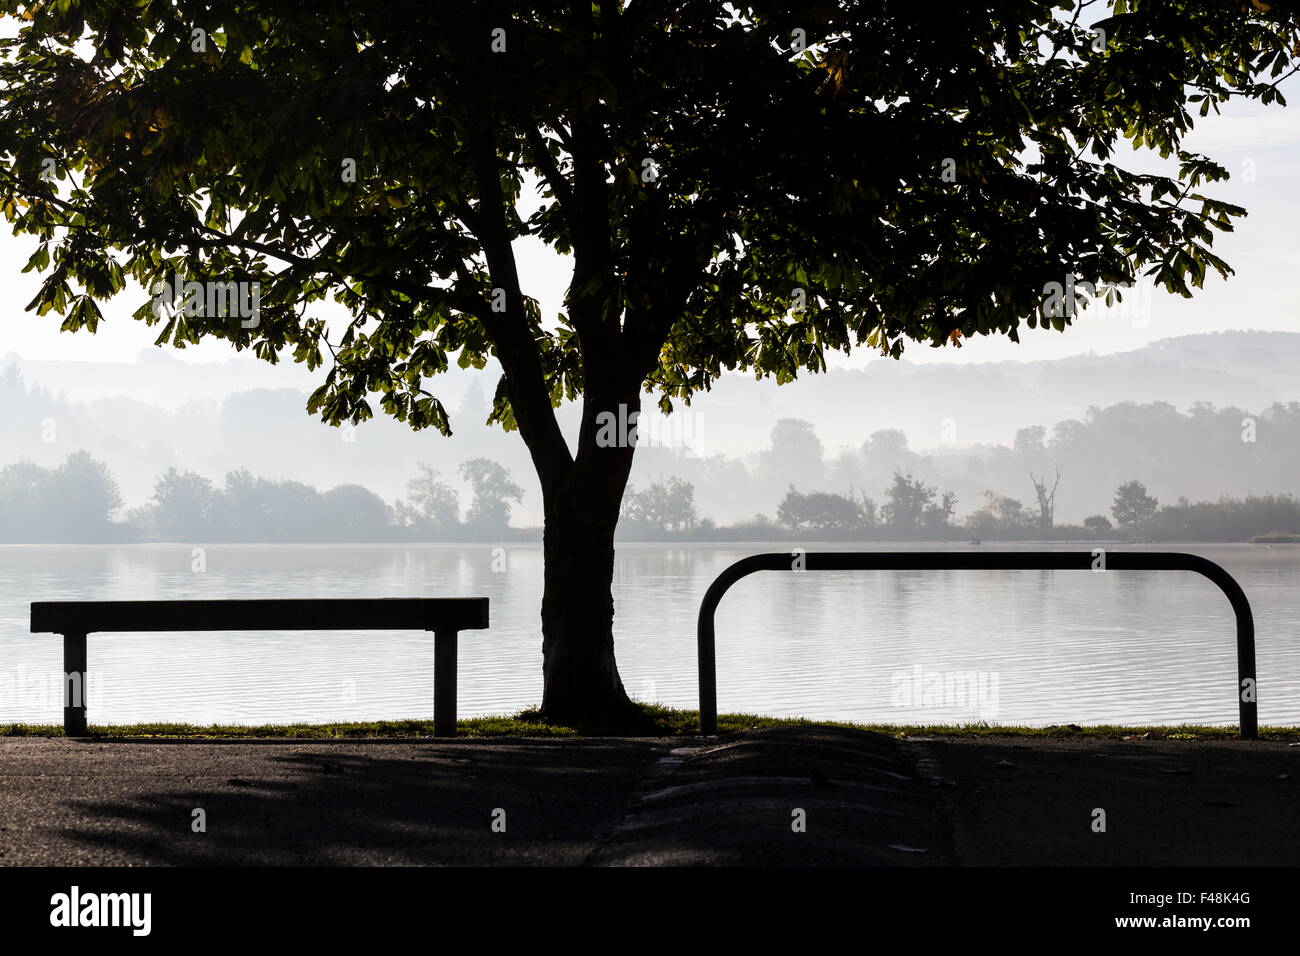 Silhouette of a tree and empty bench with a view over a misty Castle Semple Loch, Castle Semple Country Park, Lochwinnoch, Renfrewshire, Scotland, UK Stock Photo